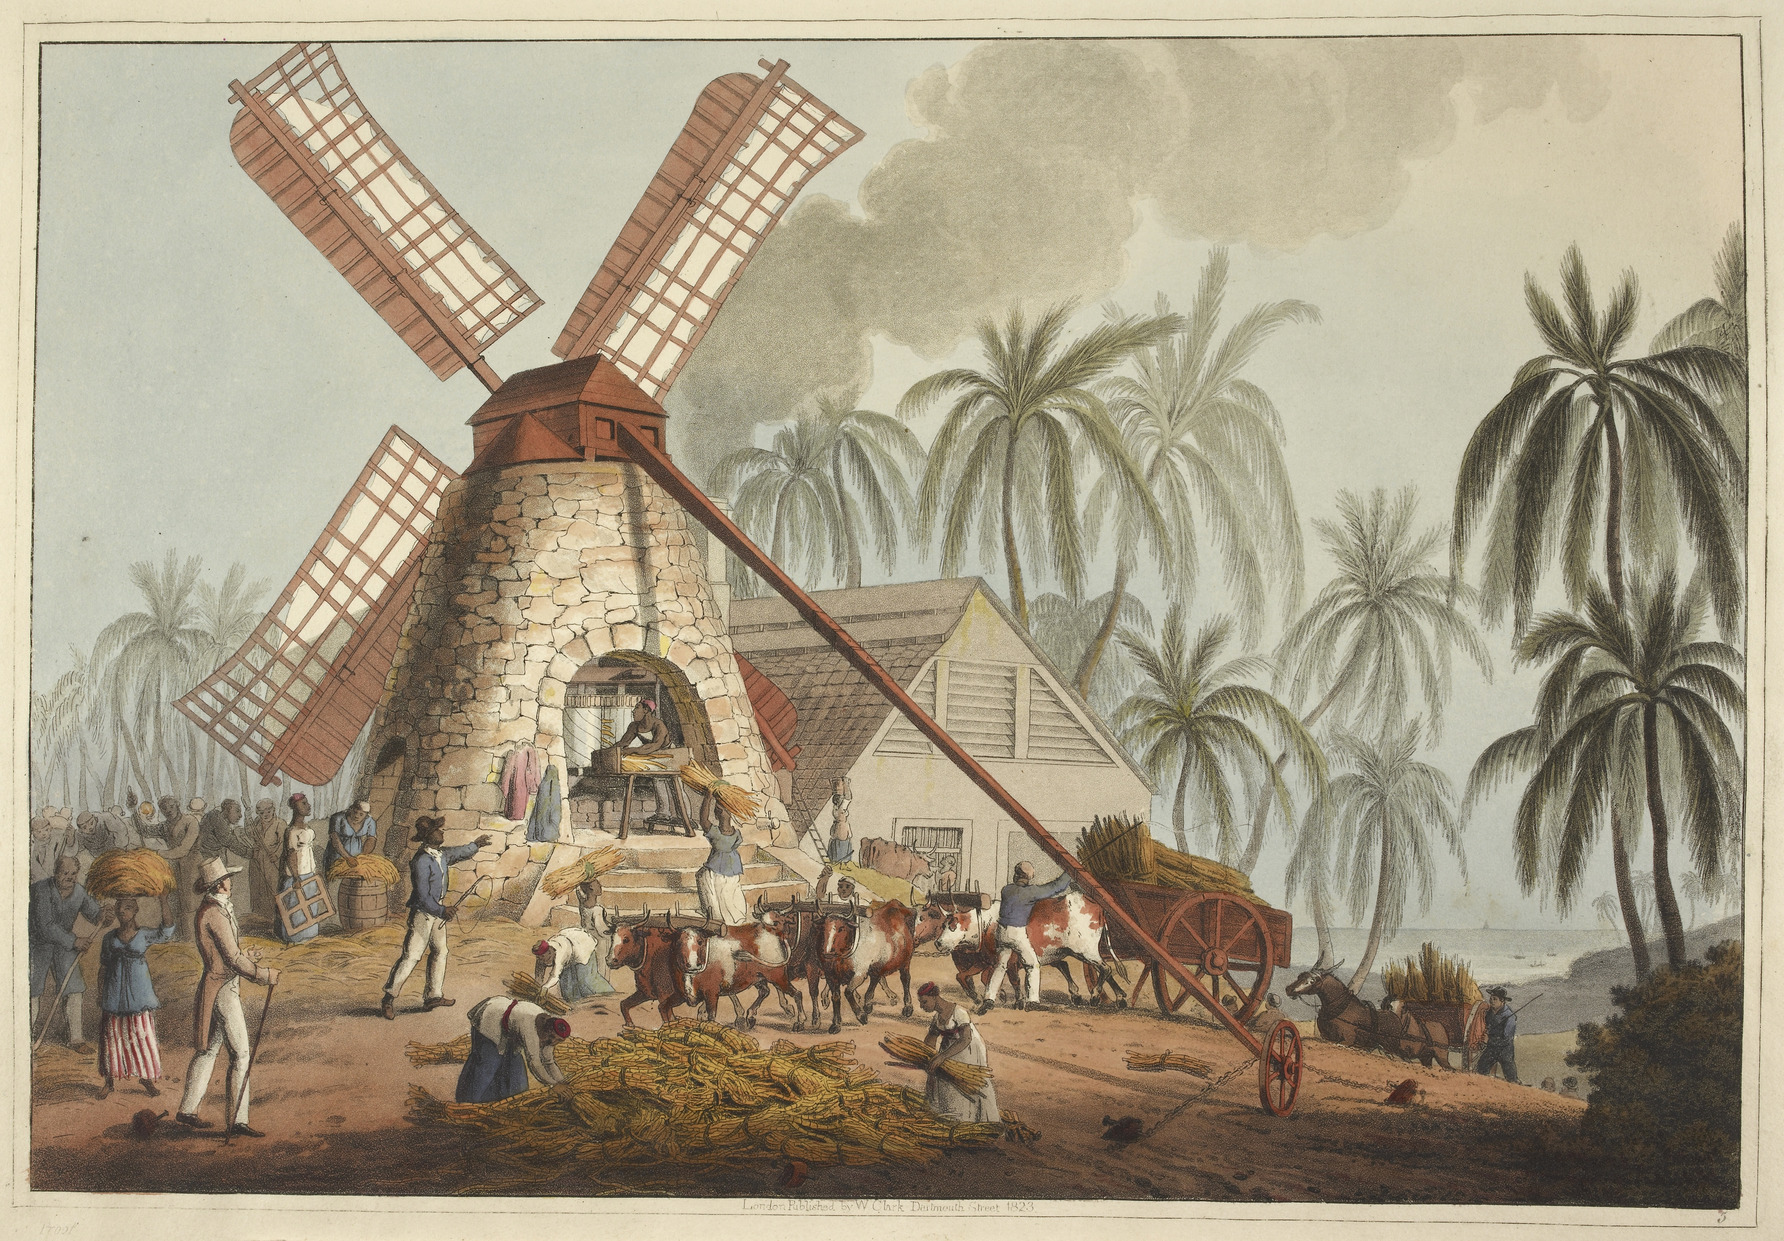 Old color engraving of enslaved people working at a Caribbean sugar plantation with a wind mill